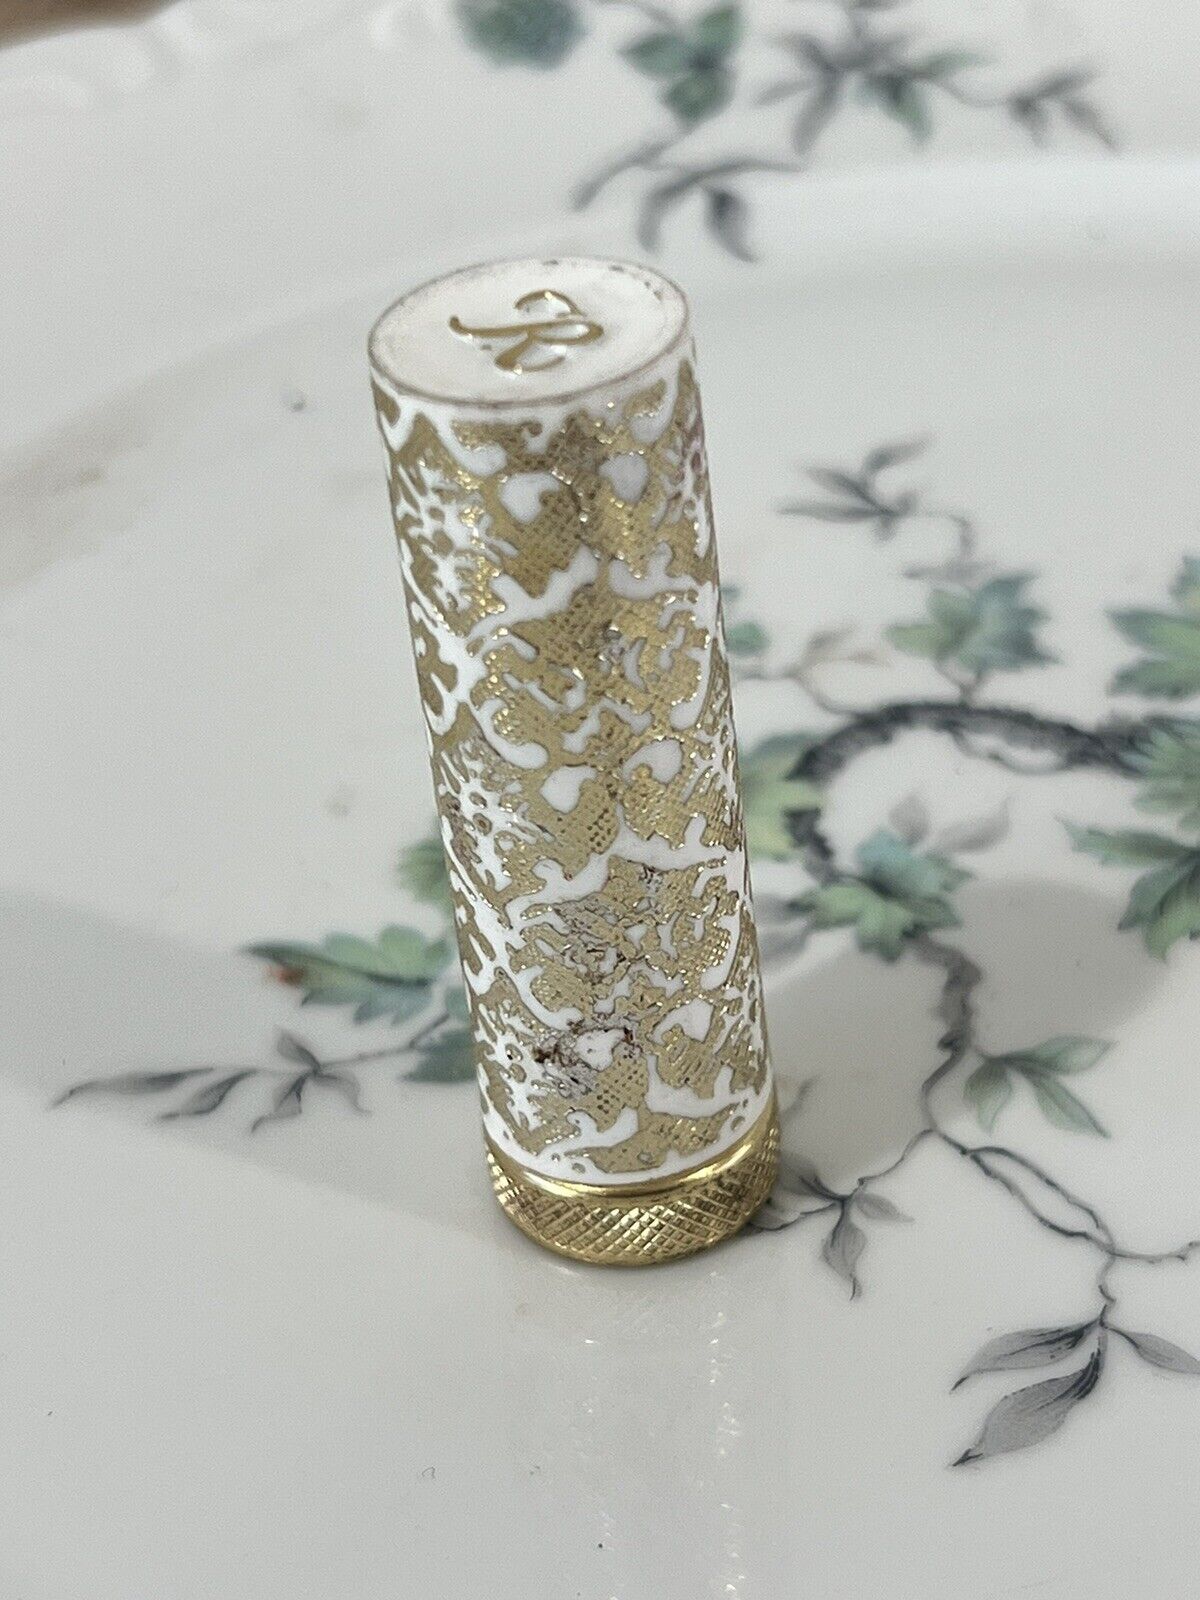 VINTAGE REVLON COLLECTIBLE  LIPSTICK  SOFTSILVER ROSE FROSTED TRANSLUCENT